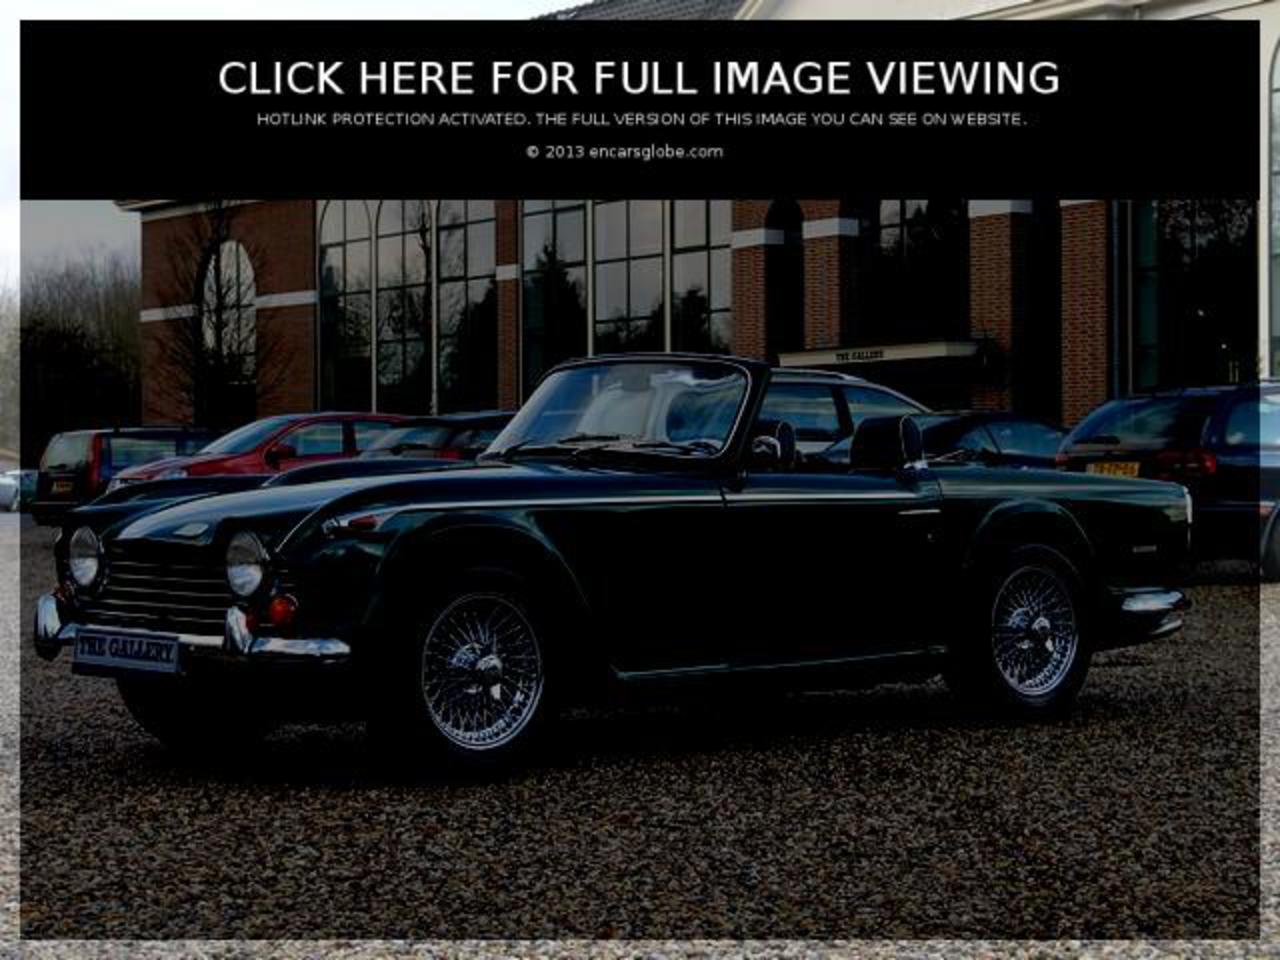 Triumph TR 250 overdrive Photo Gallery: Photo #12 out of 8, Image ...